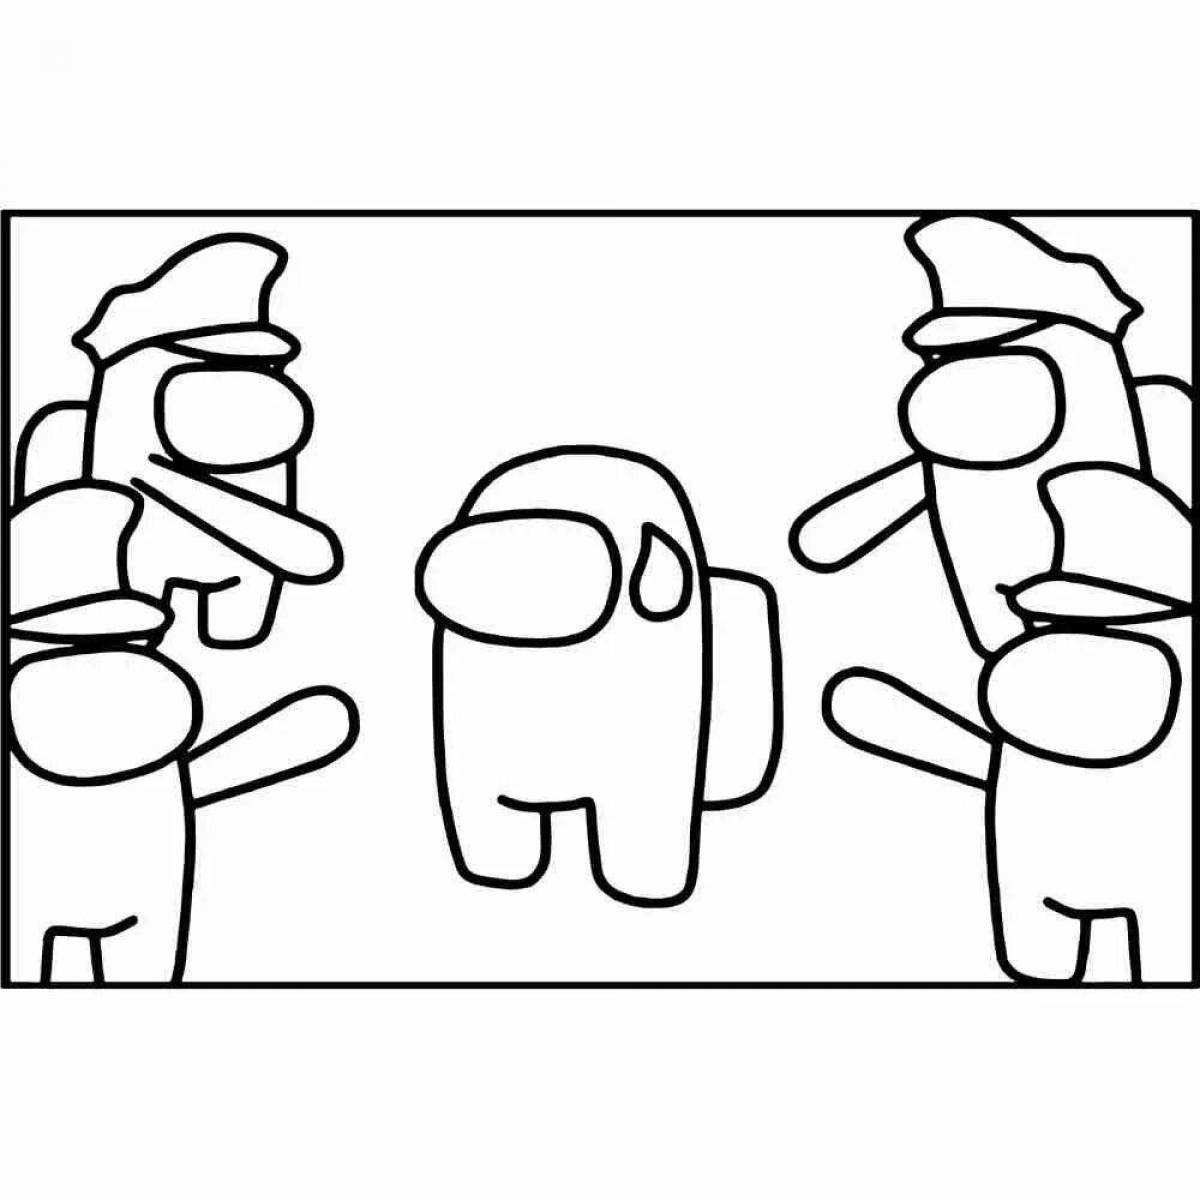 Colorful ace sticker coloring page